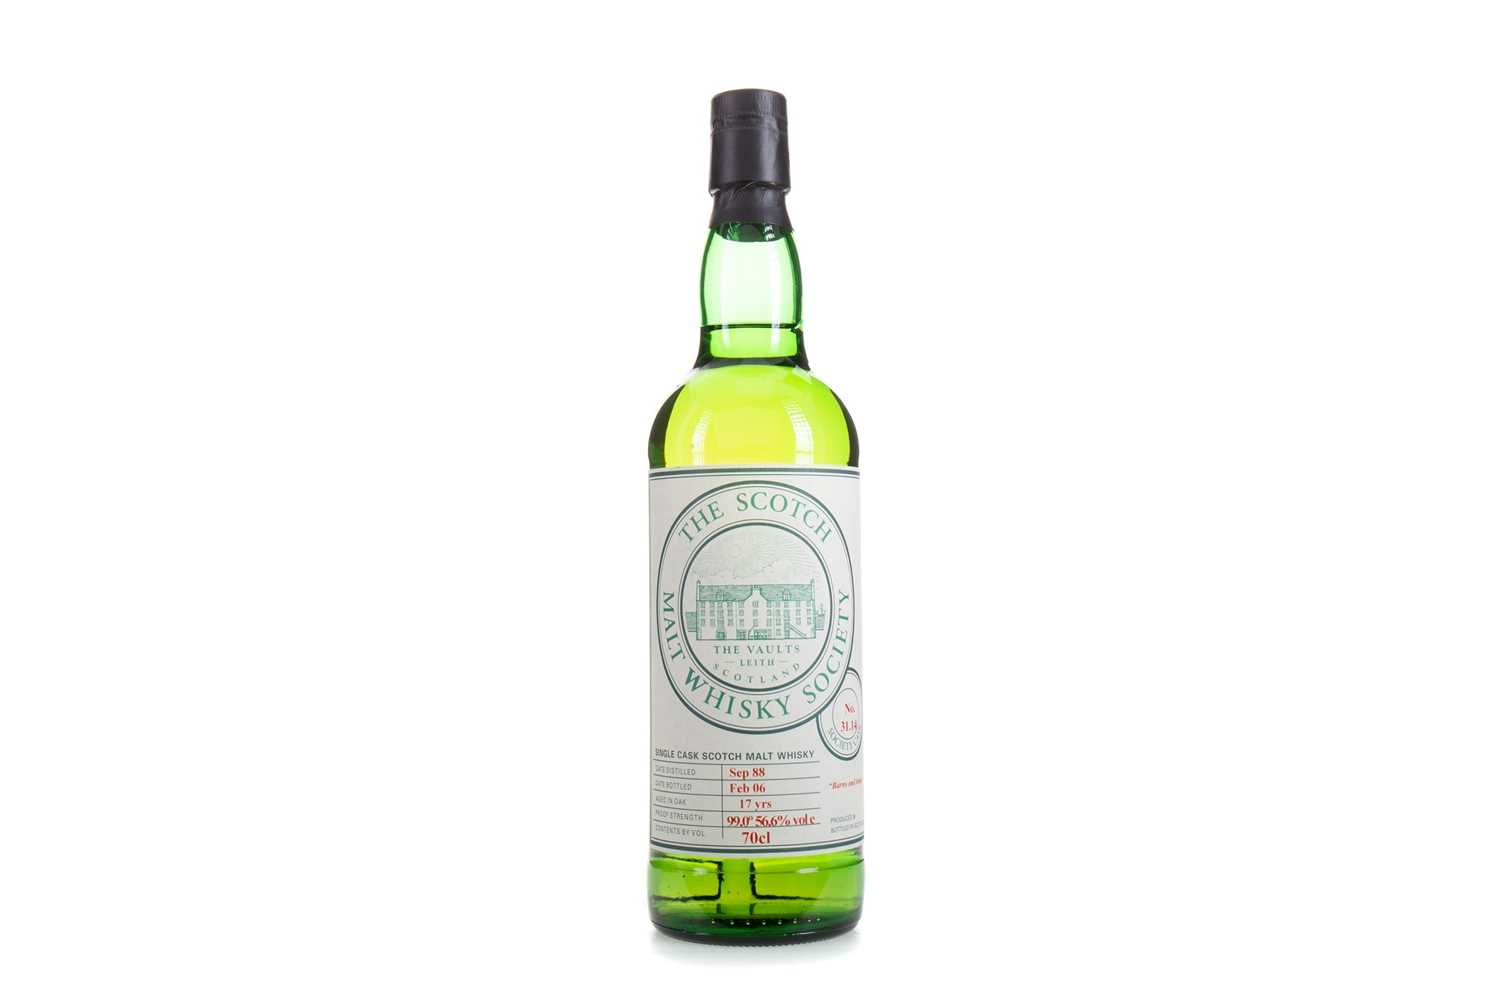 Lot 30 - SMWS 31.14 JURA 1988 17 YEAR OLD